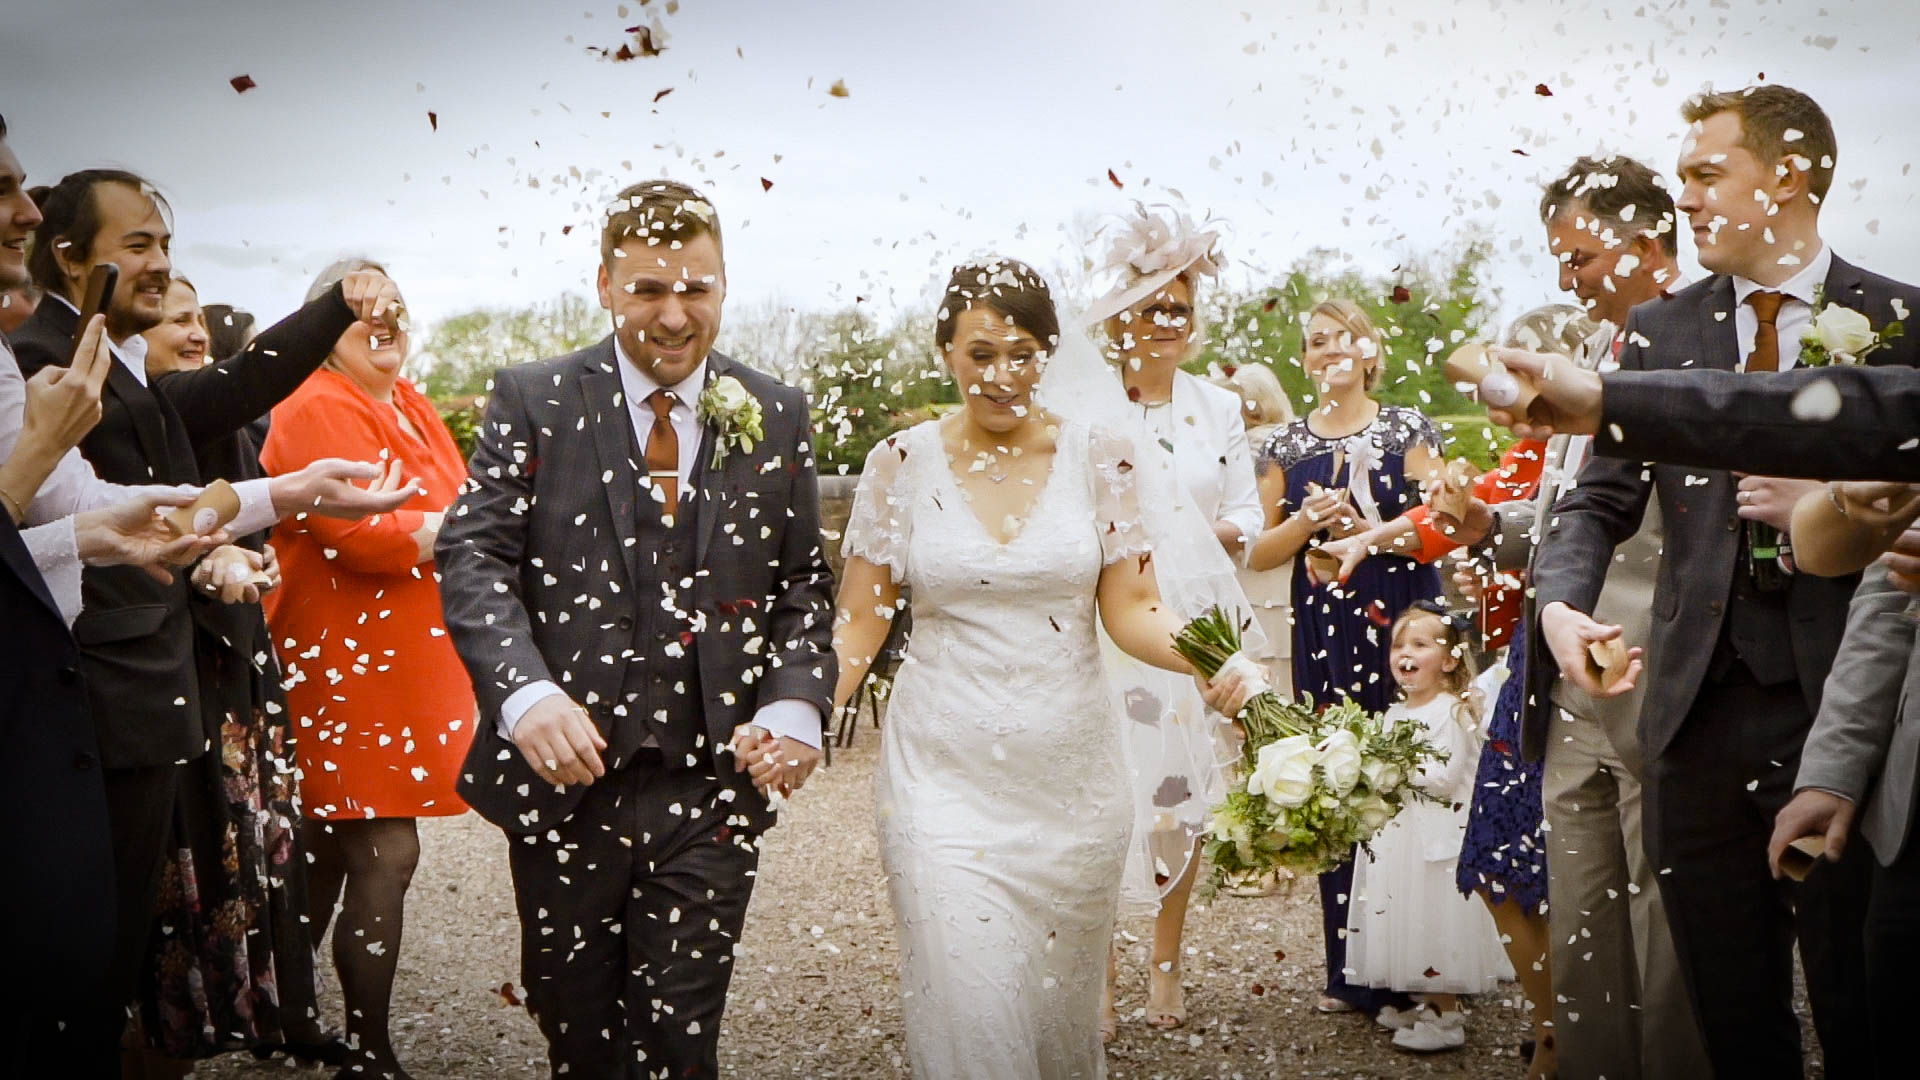 All day Wedding Videography from £599